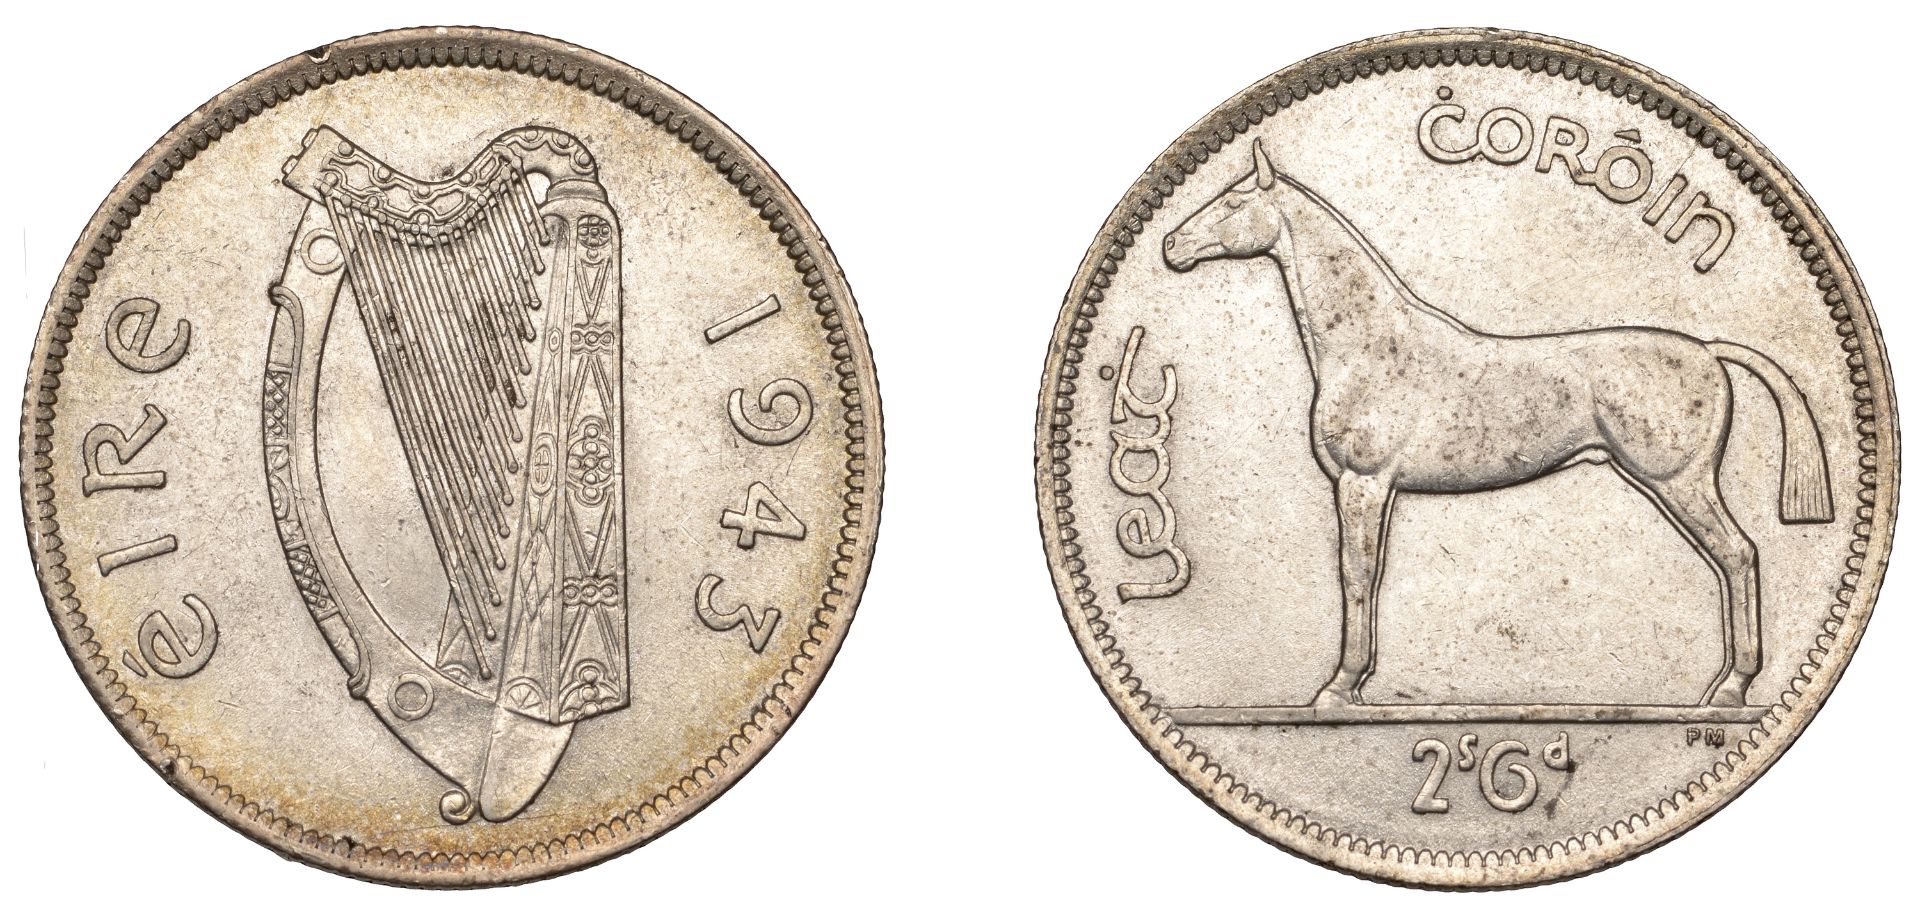 Eire (1937- ), Halfcrown, 1943 (S 6633). Nearly extremely fine and very rare Â£700-Â£900